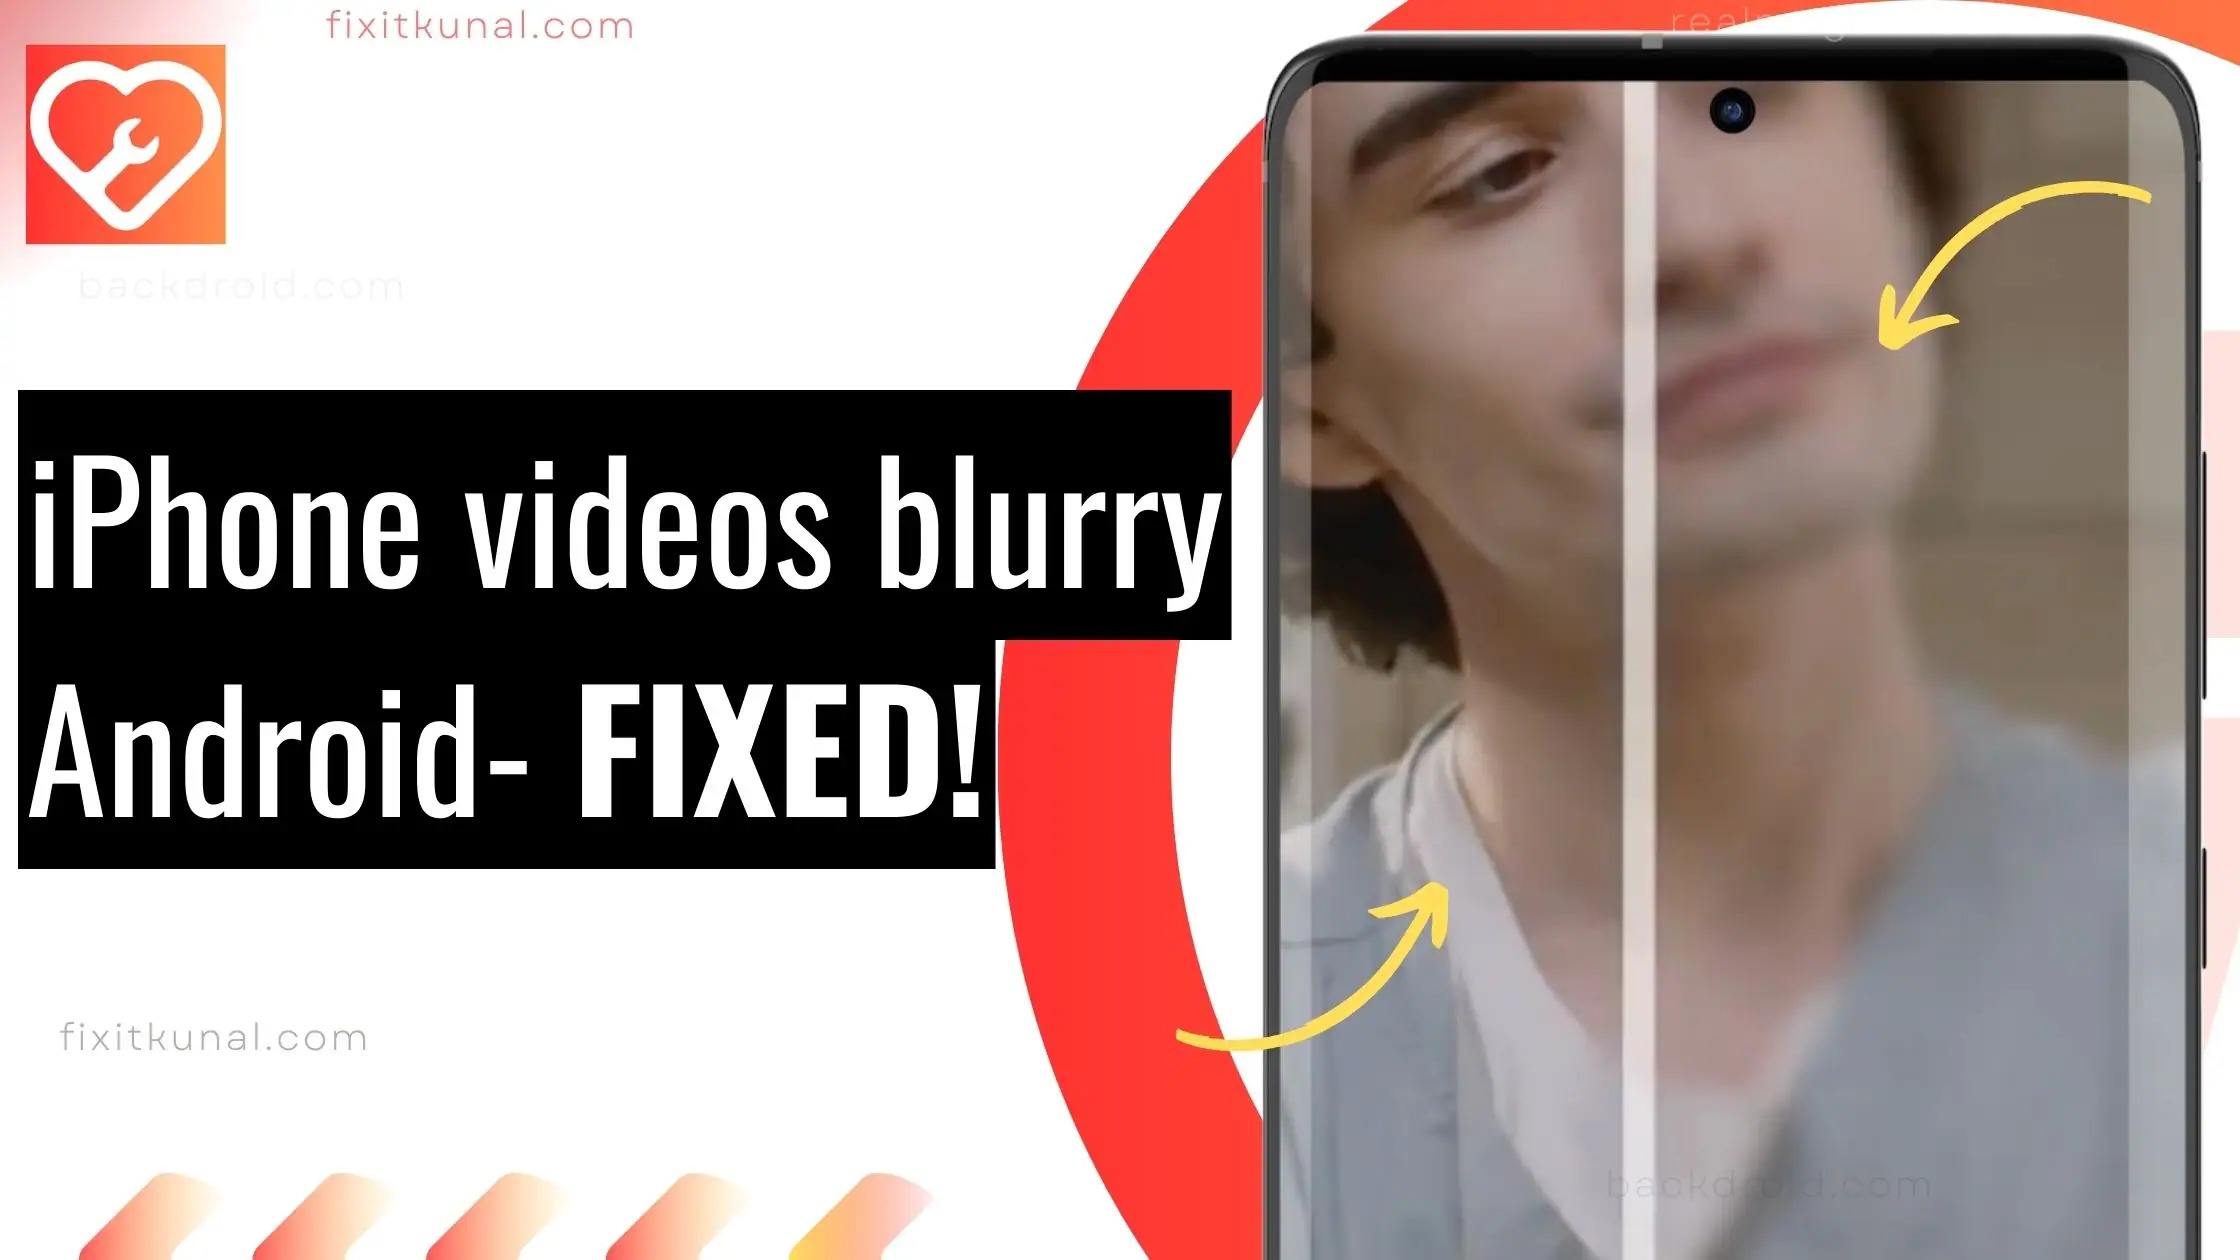 a thumbnail image for fixing blurry iphone videos on android with a black smartphone on a red background